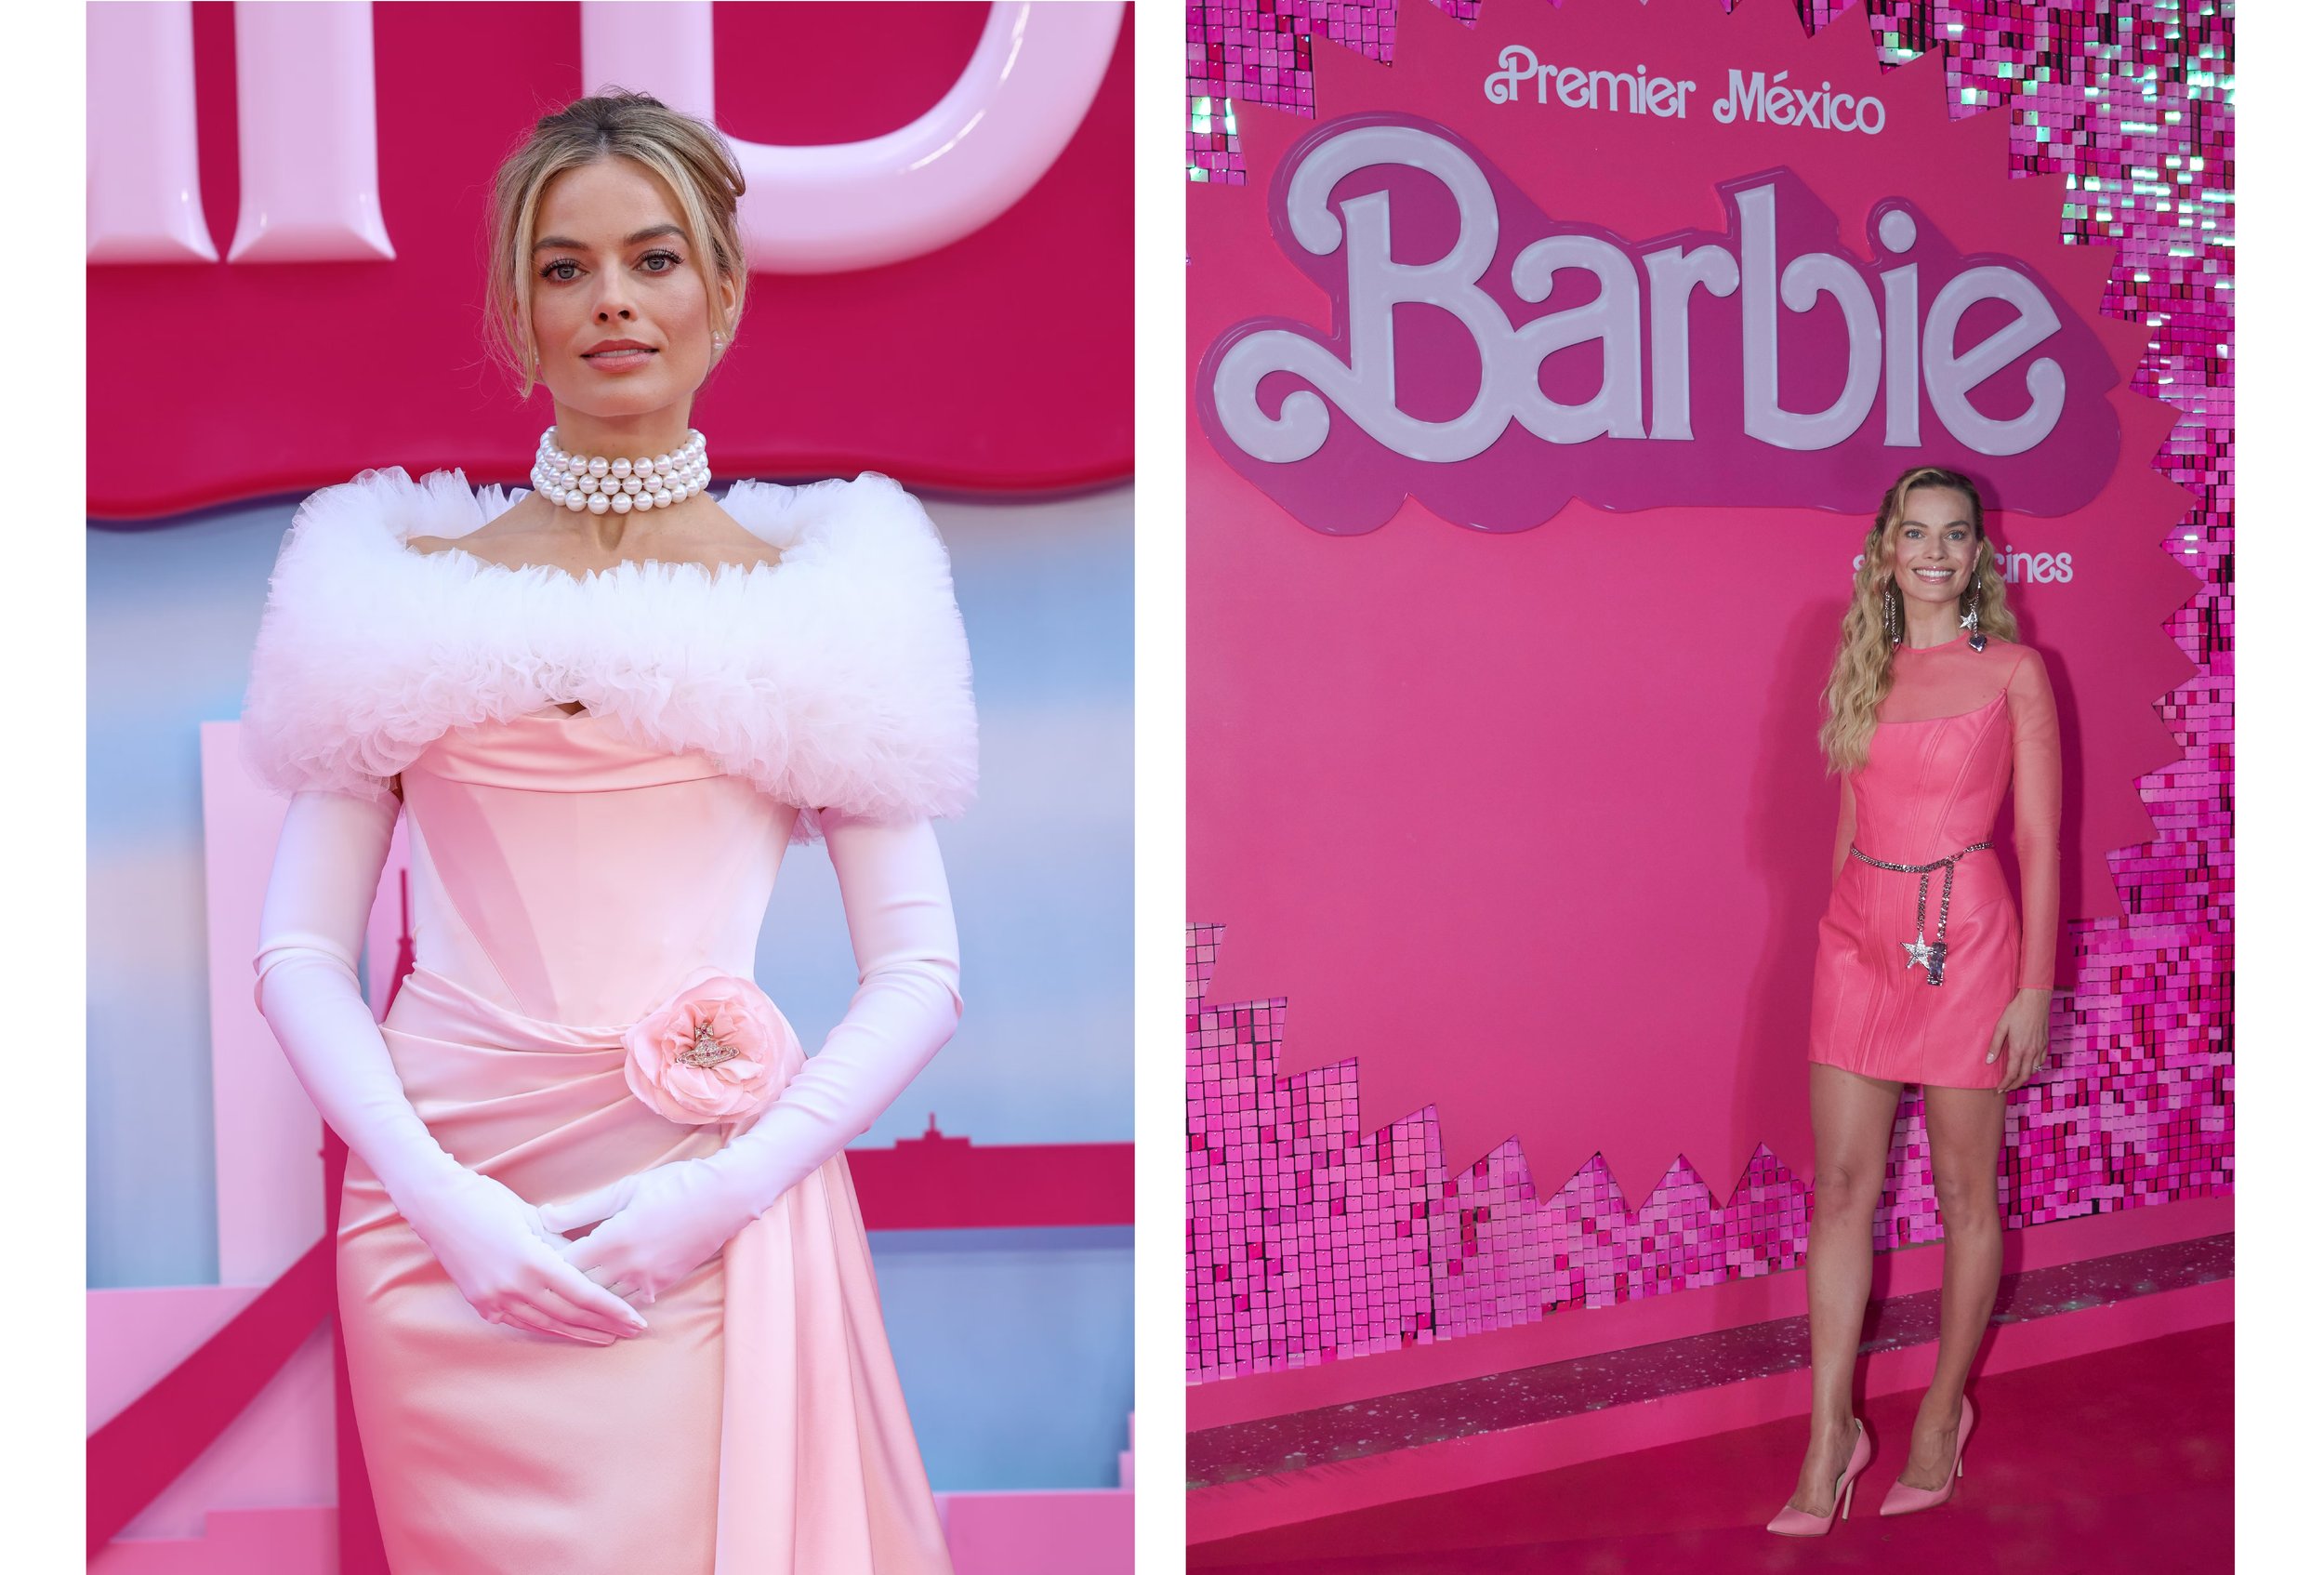 Has Pink Always Been a “Girly” Color?